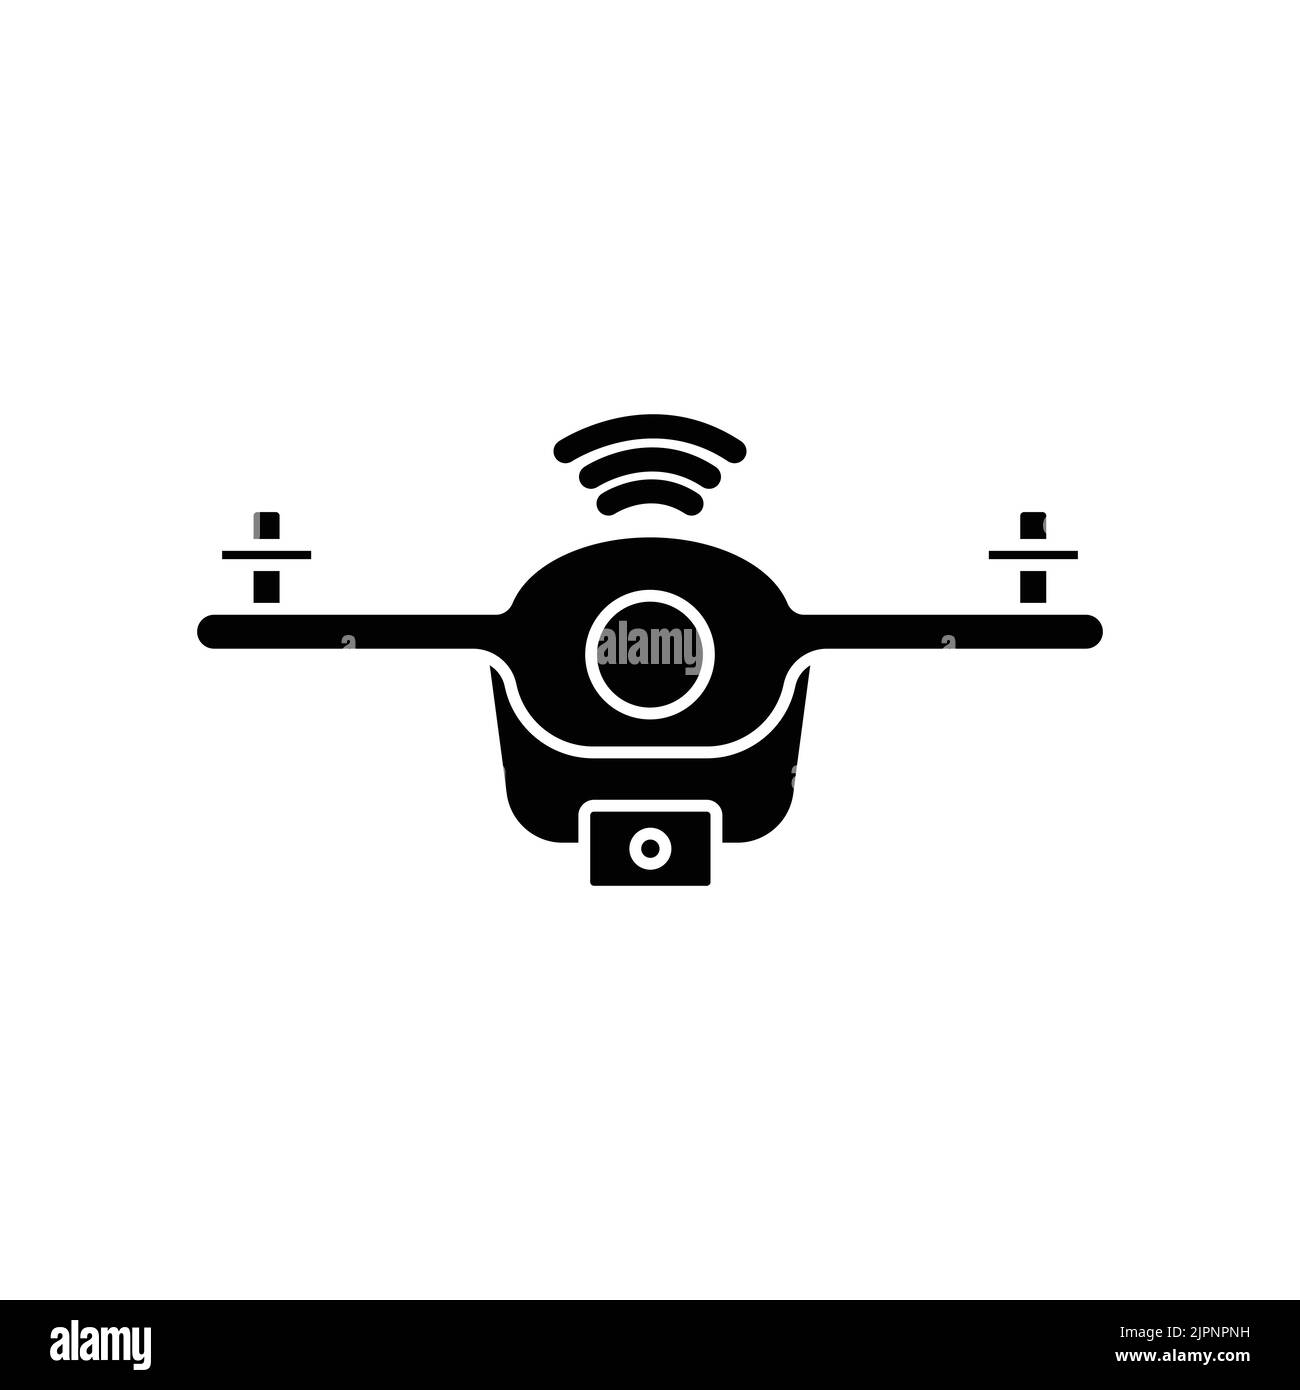 Drone icon. icon related to technology. smart device. drone with signal. glyph icon style, solid. Simple design editable Stock Vector